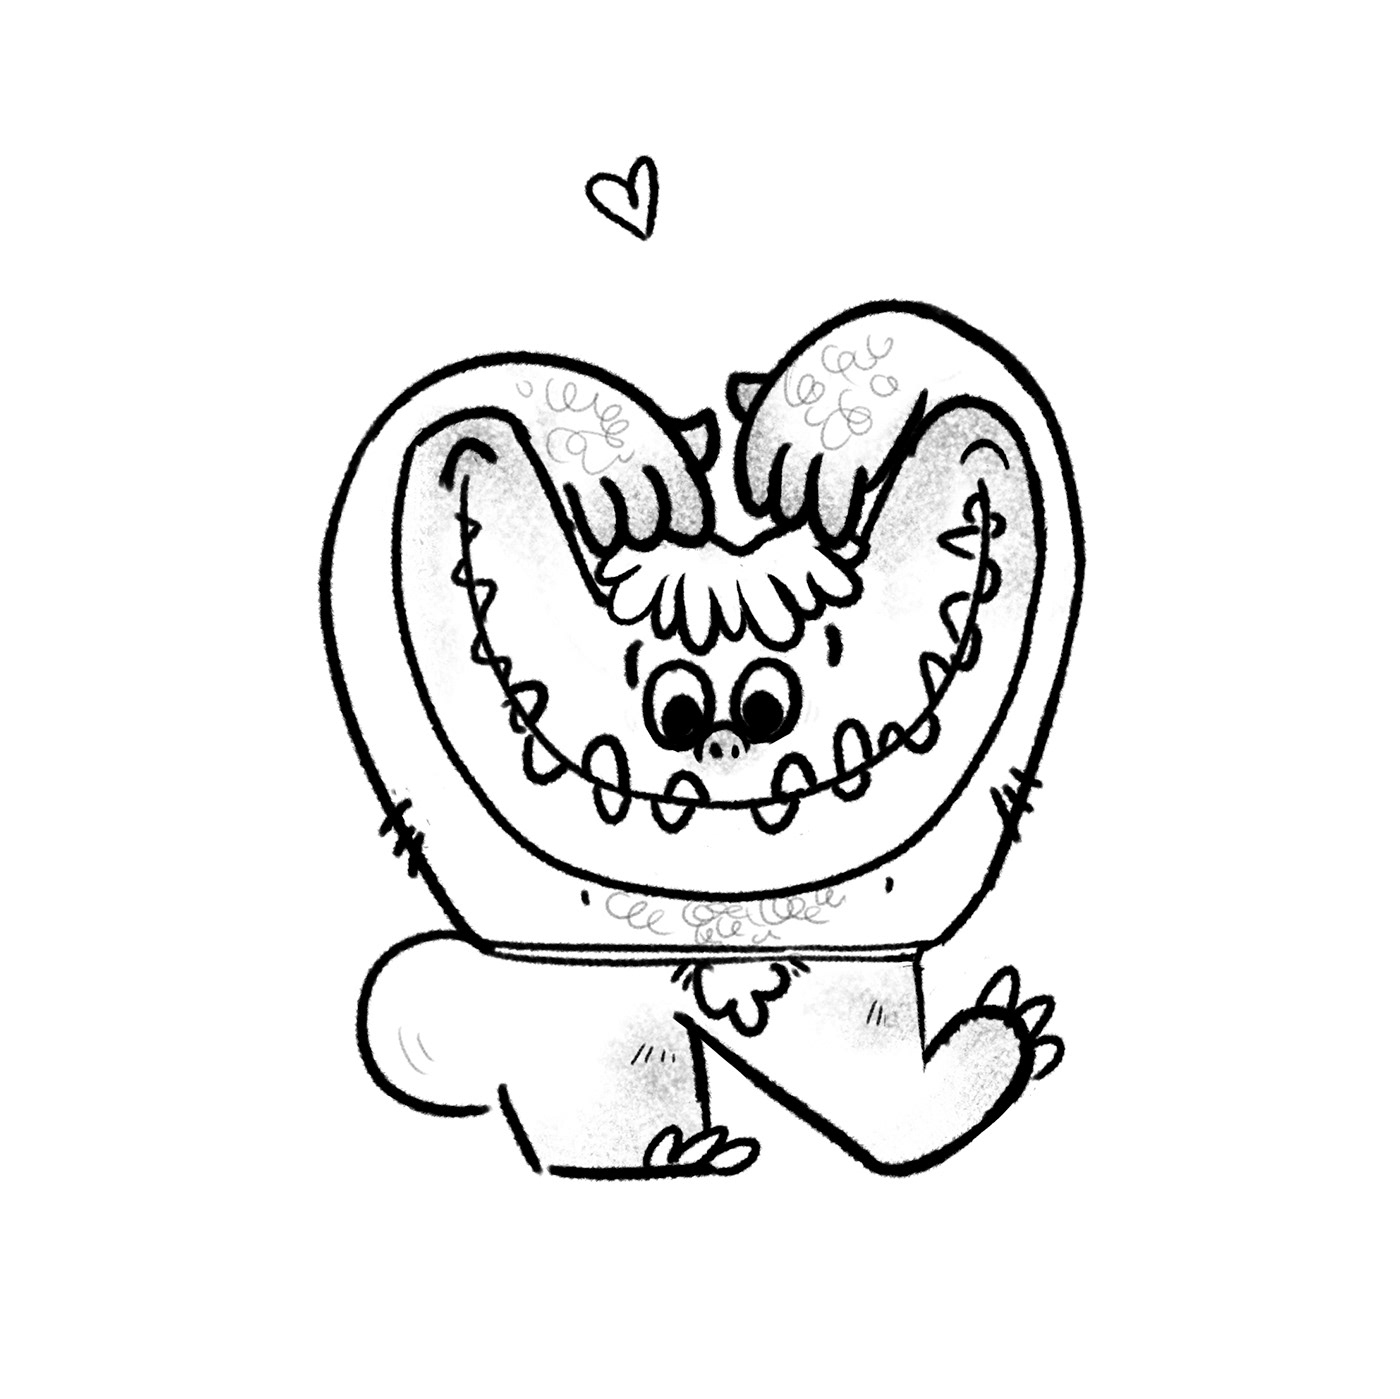 Love Character design  monster cupid stupid Icon badge